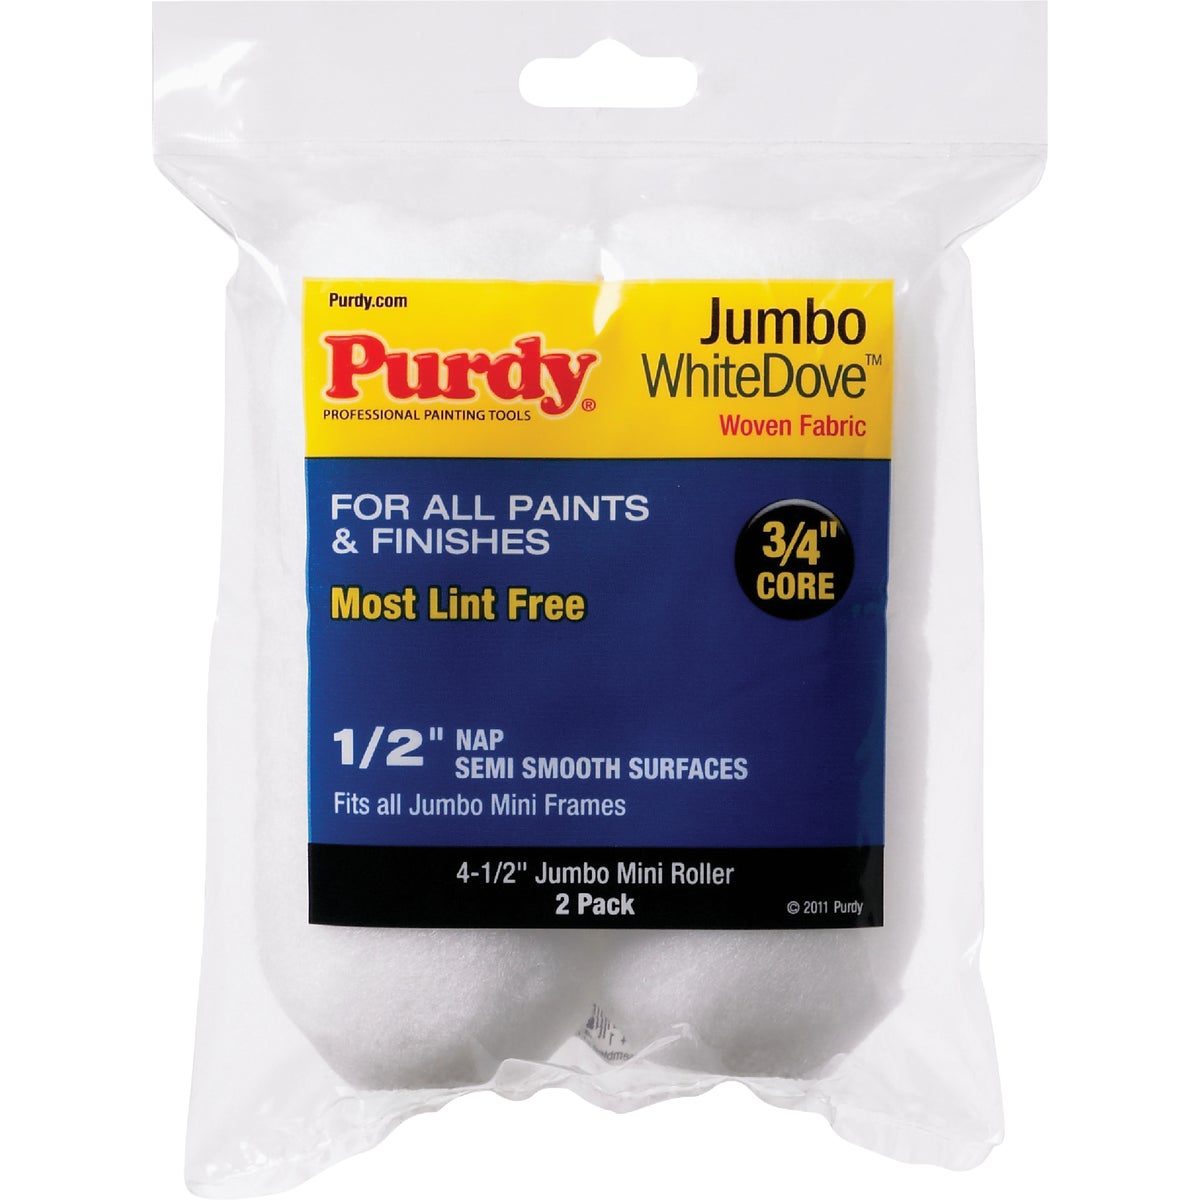 Purdy White Dove 4-1/2 In. x 1/2 In. Jumbo Mini Woven Fabric Roller Cover (2-Pack)